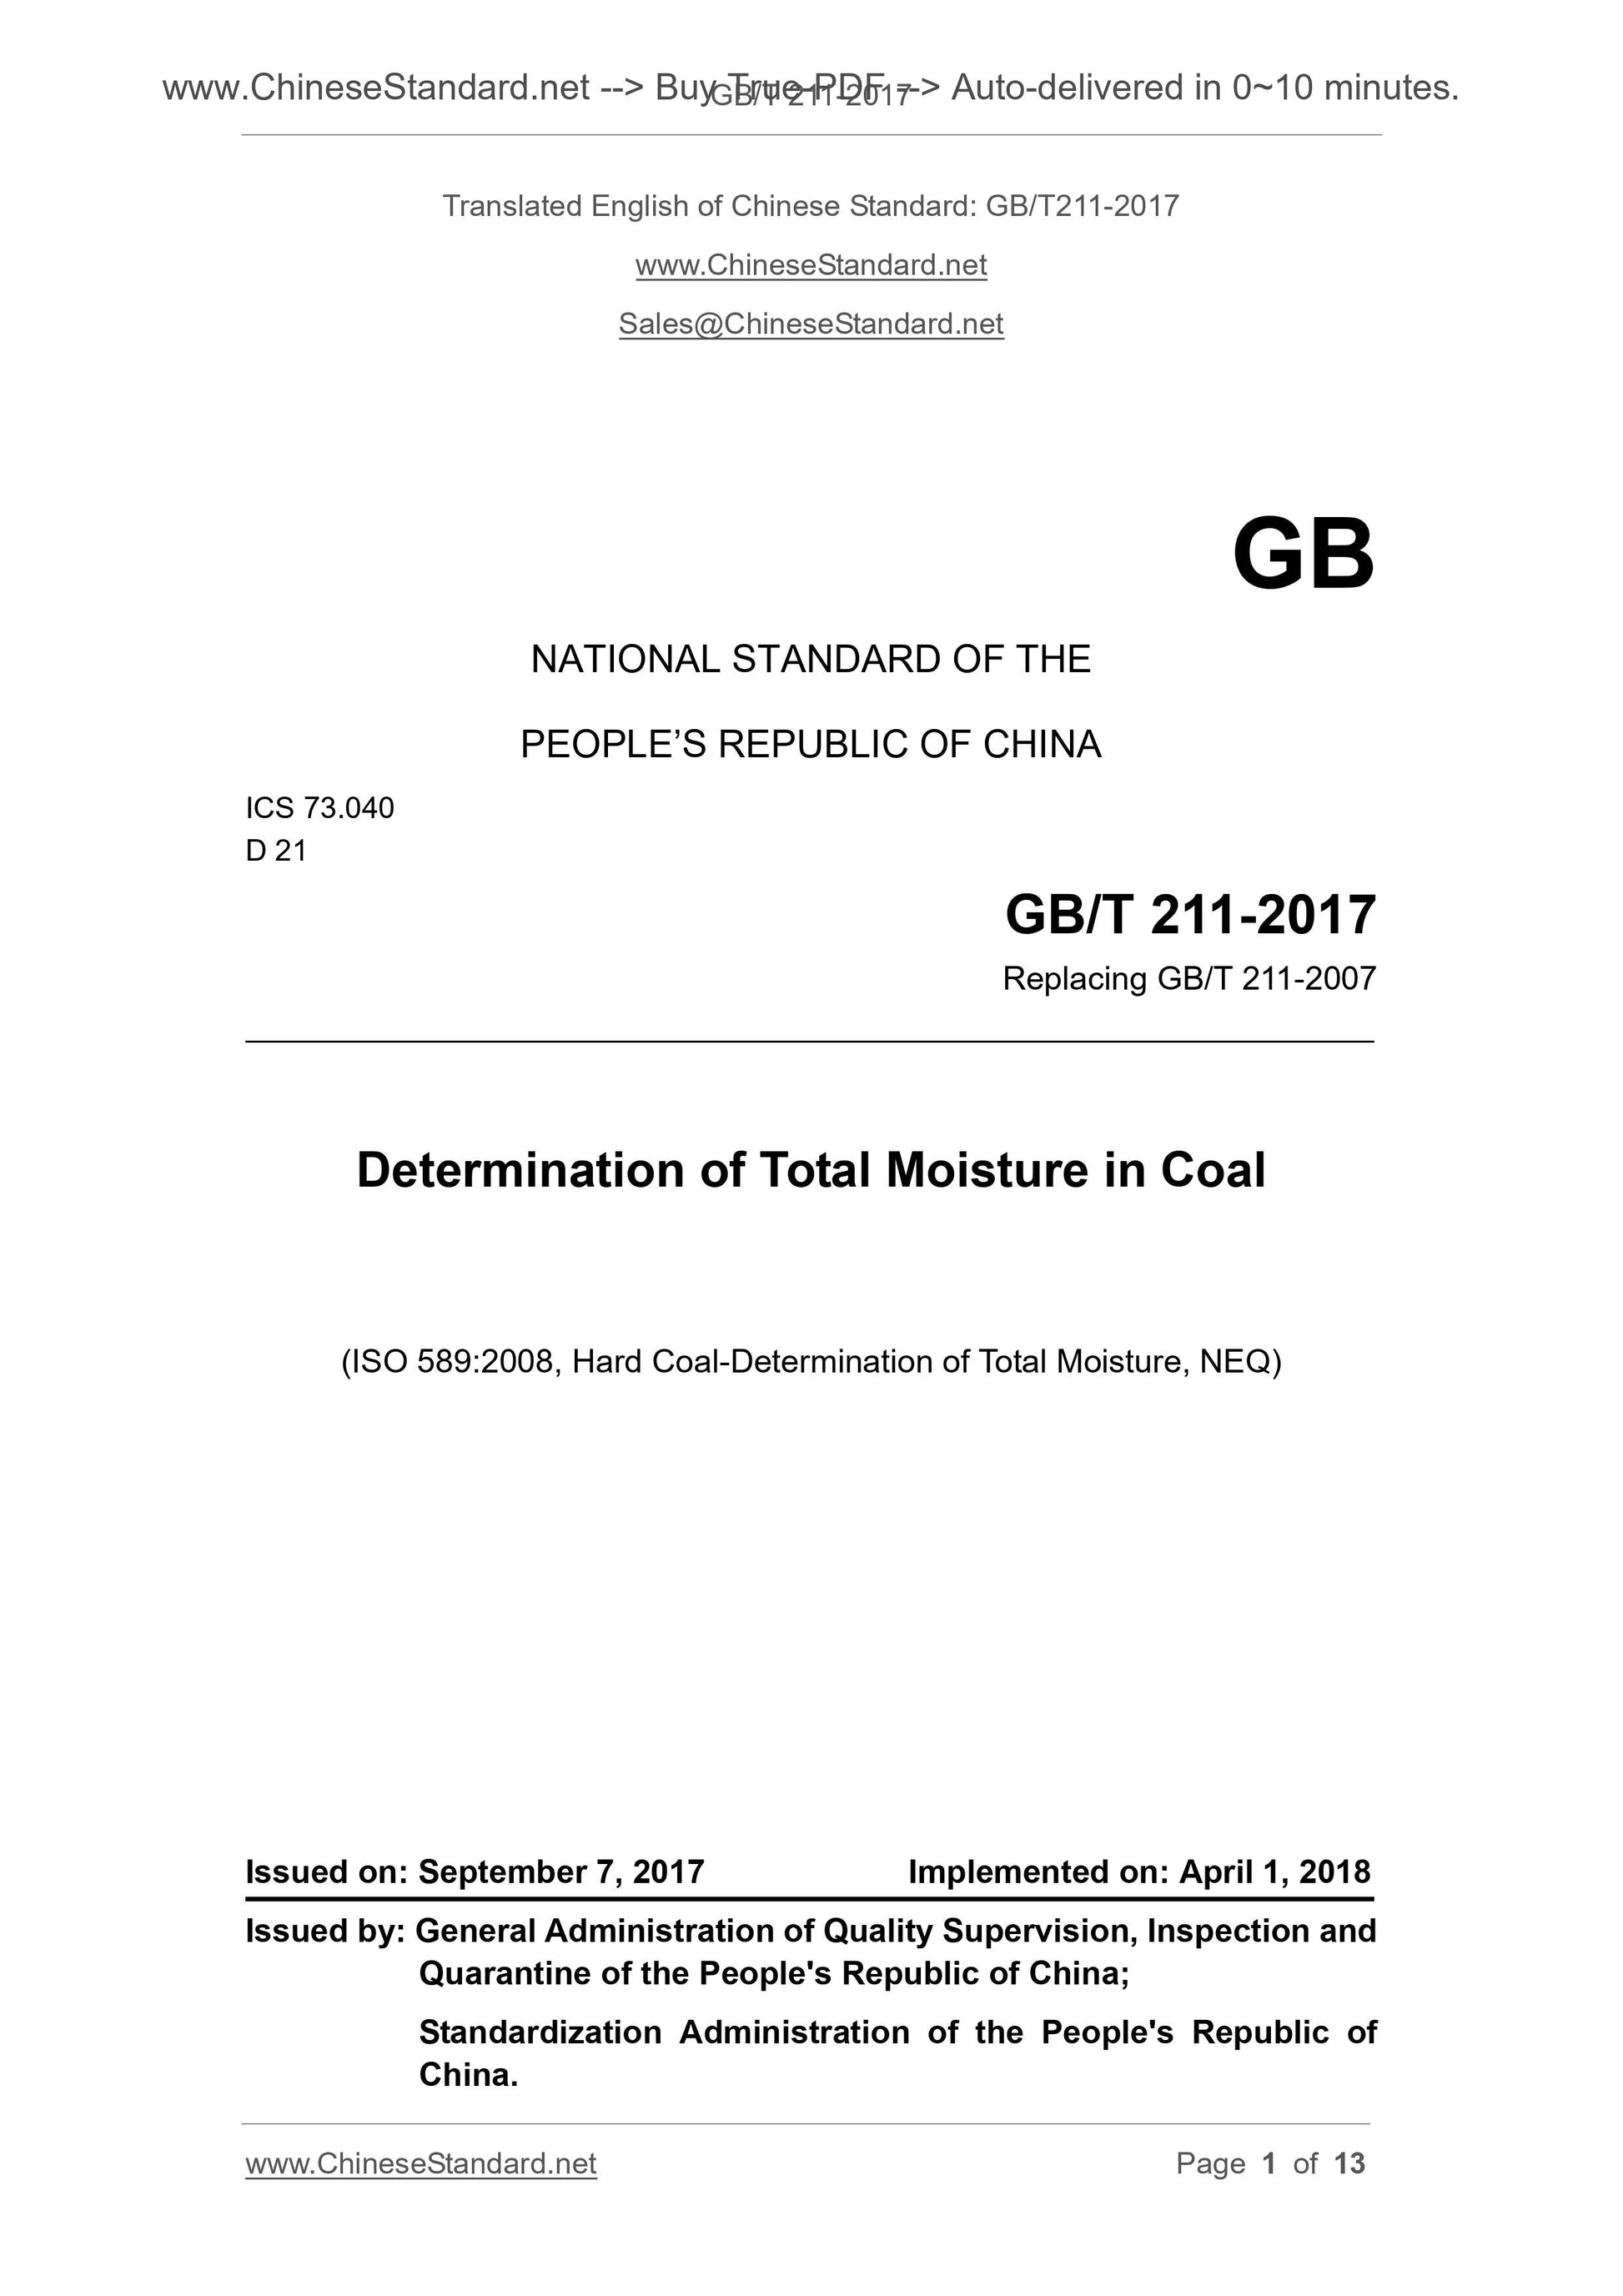 GB/T 211-2017 Page 1